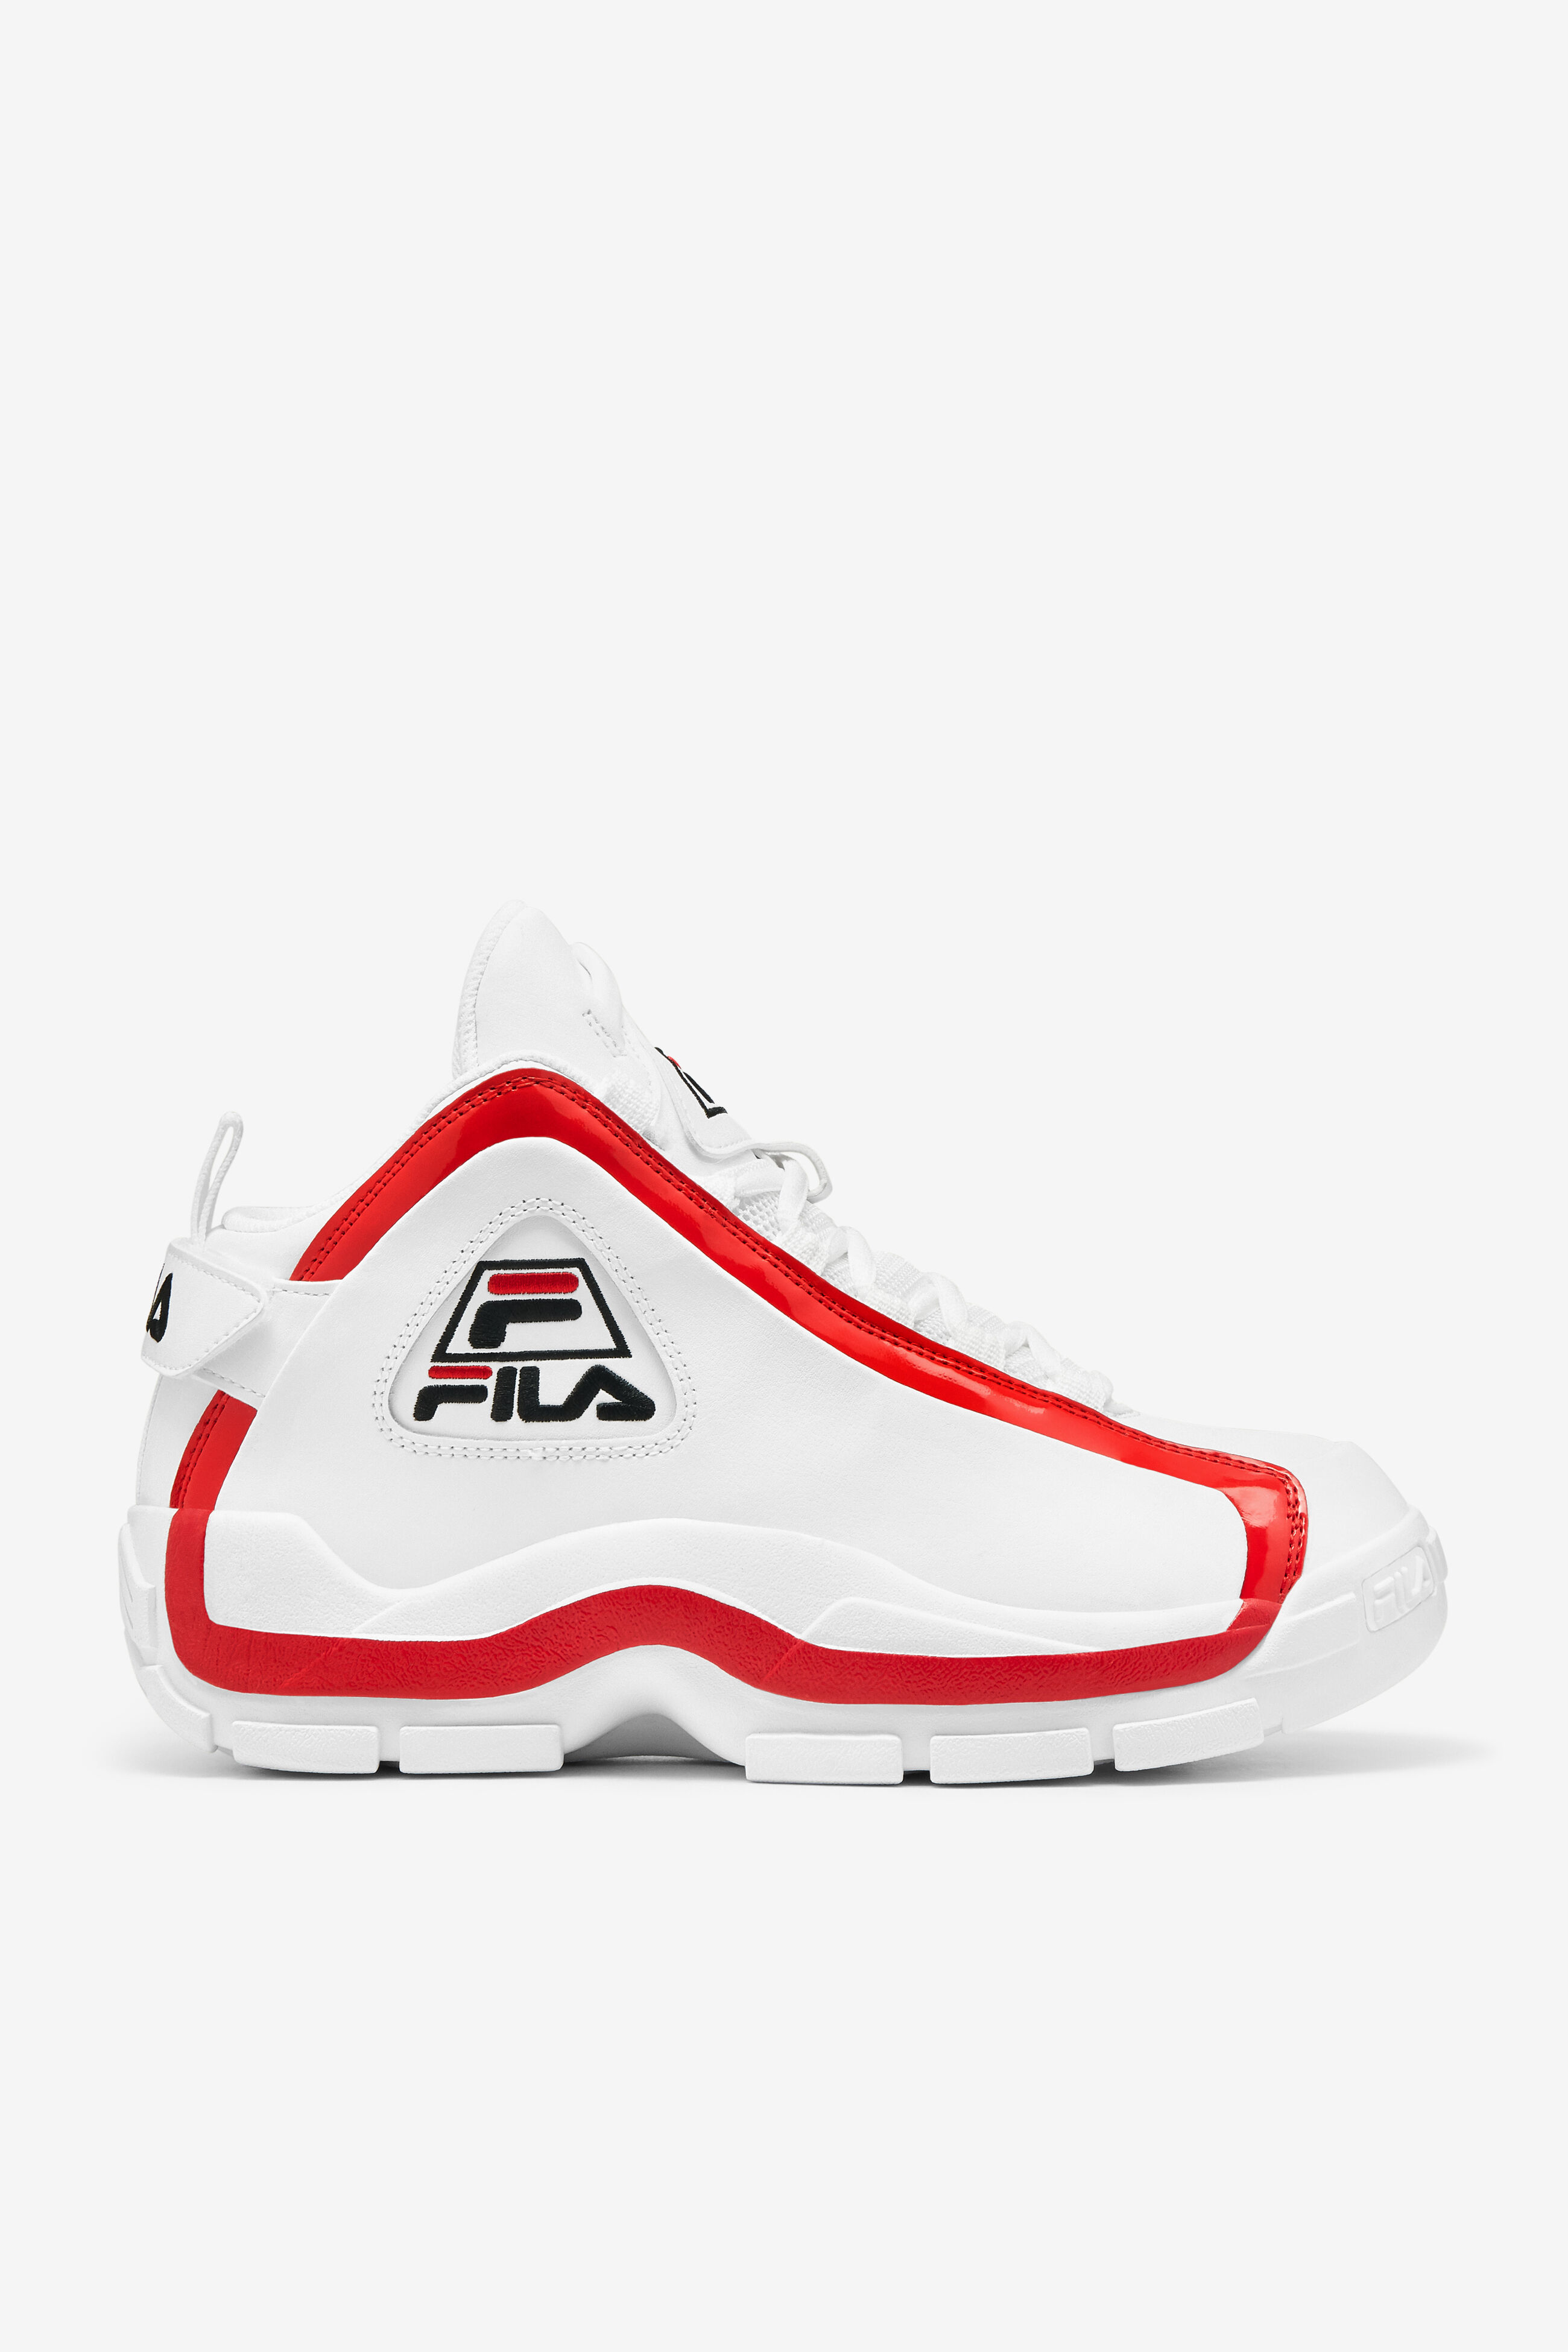 Grant Hill 2 Shoes White + Red Colorway | Fila 1BM00637